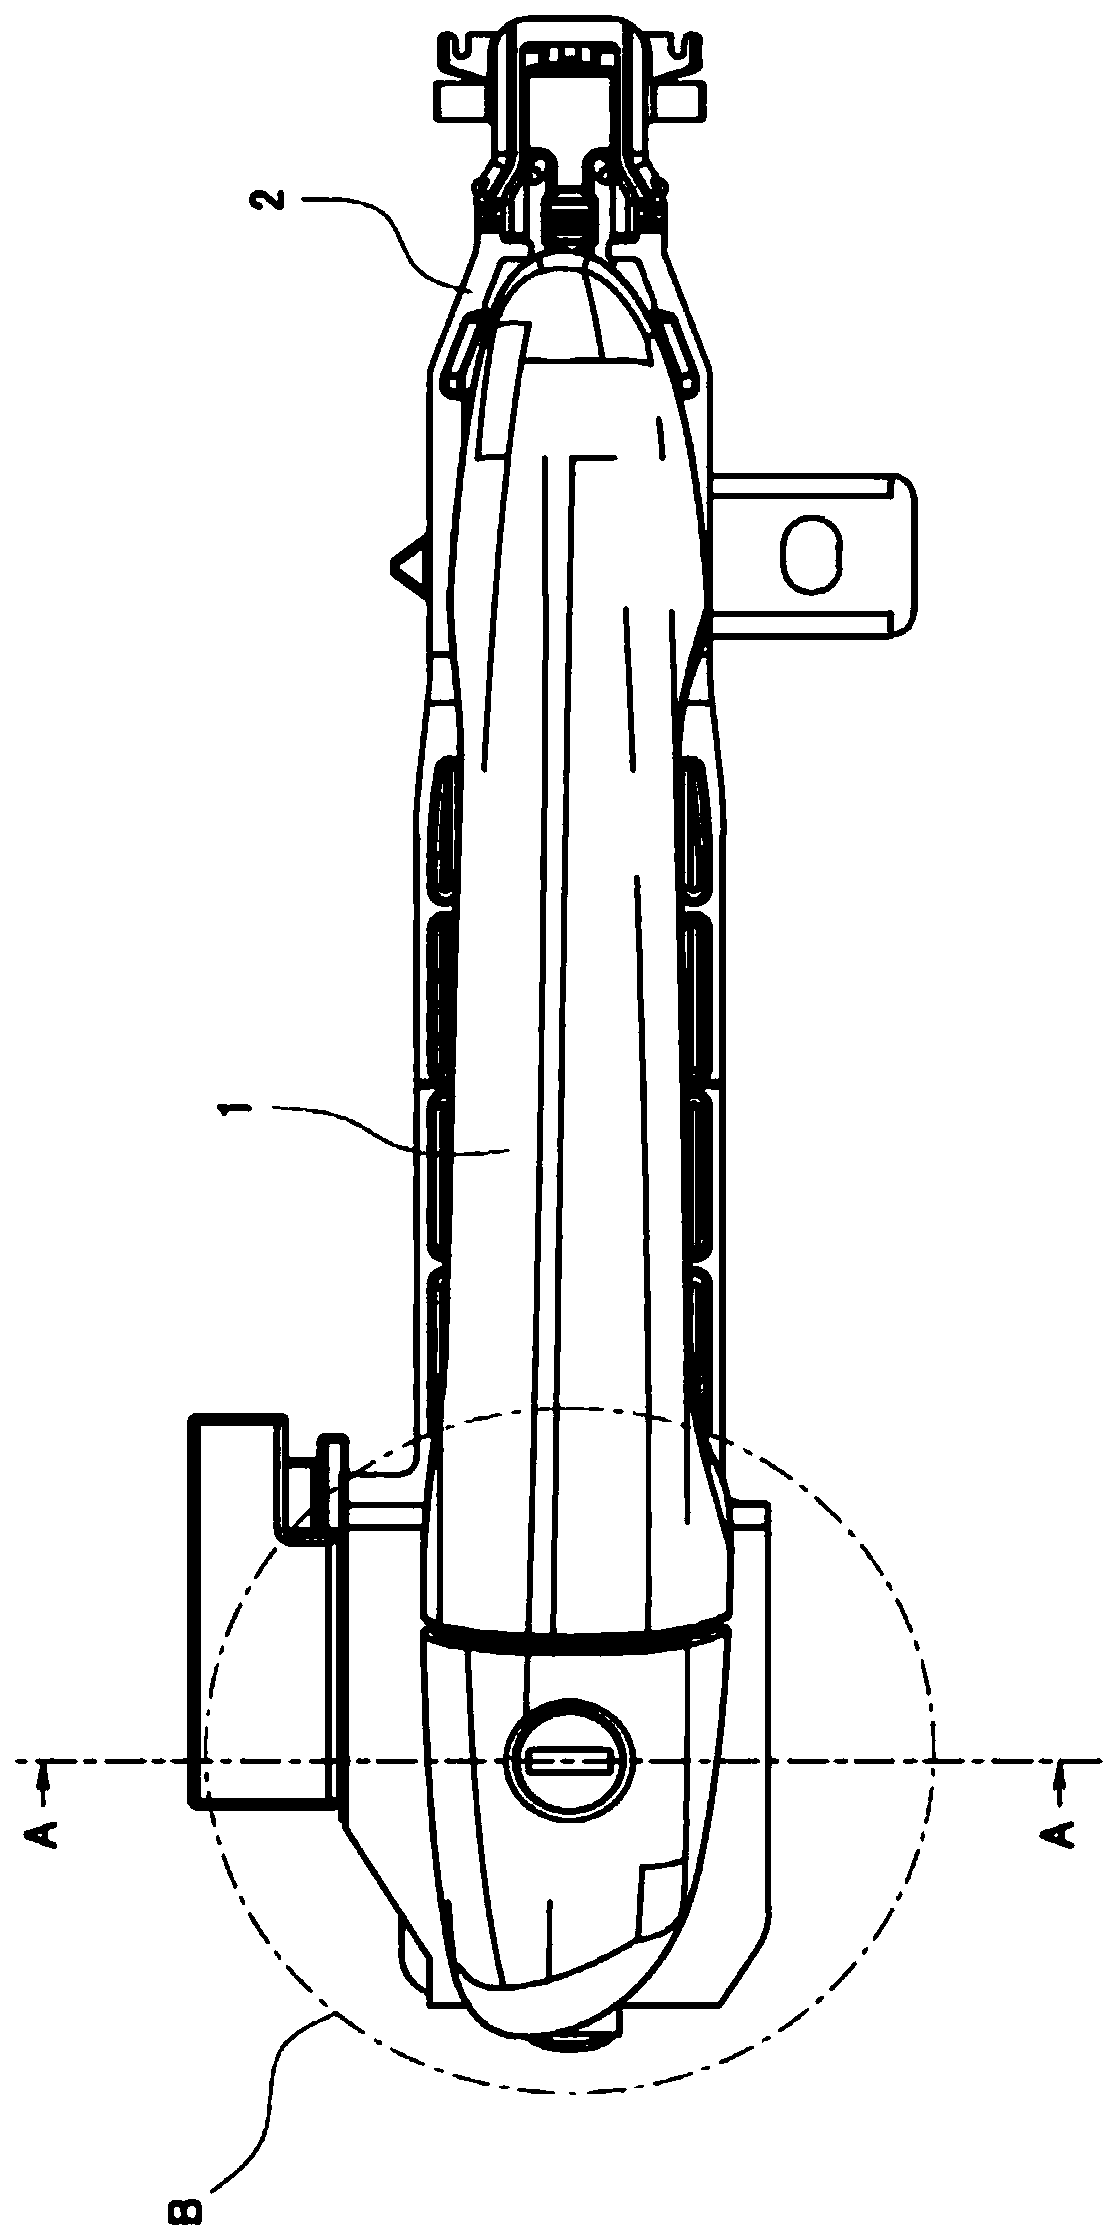 The installation structure of the lock cylinder